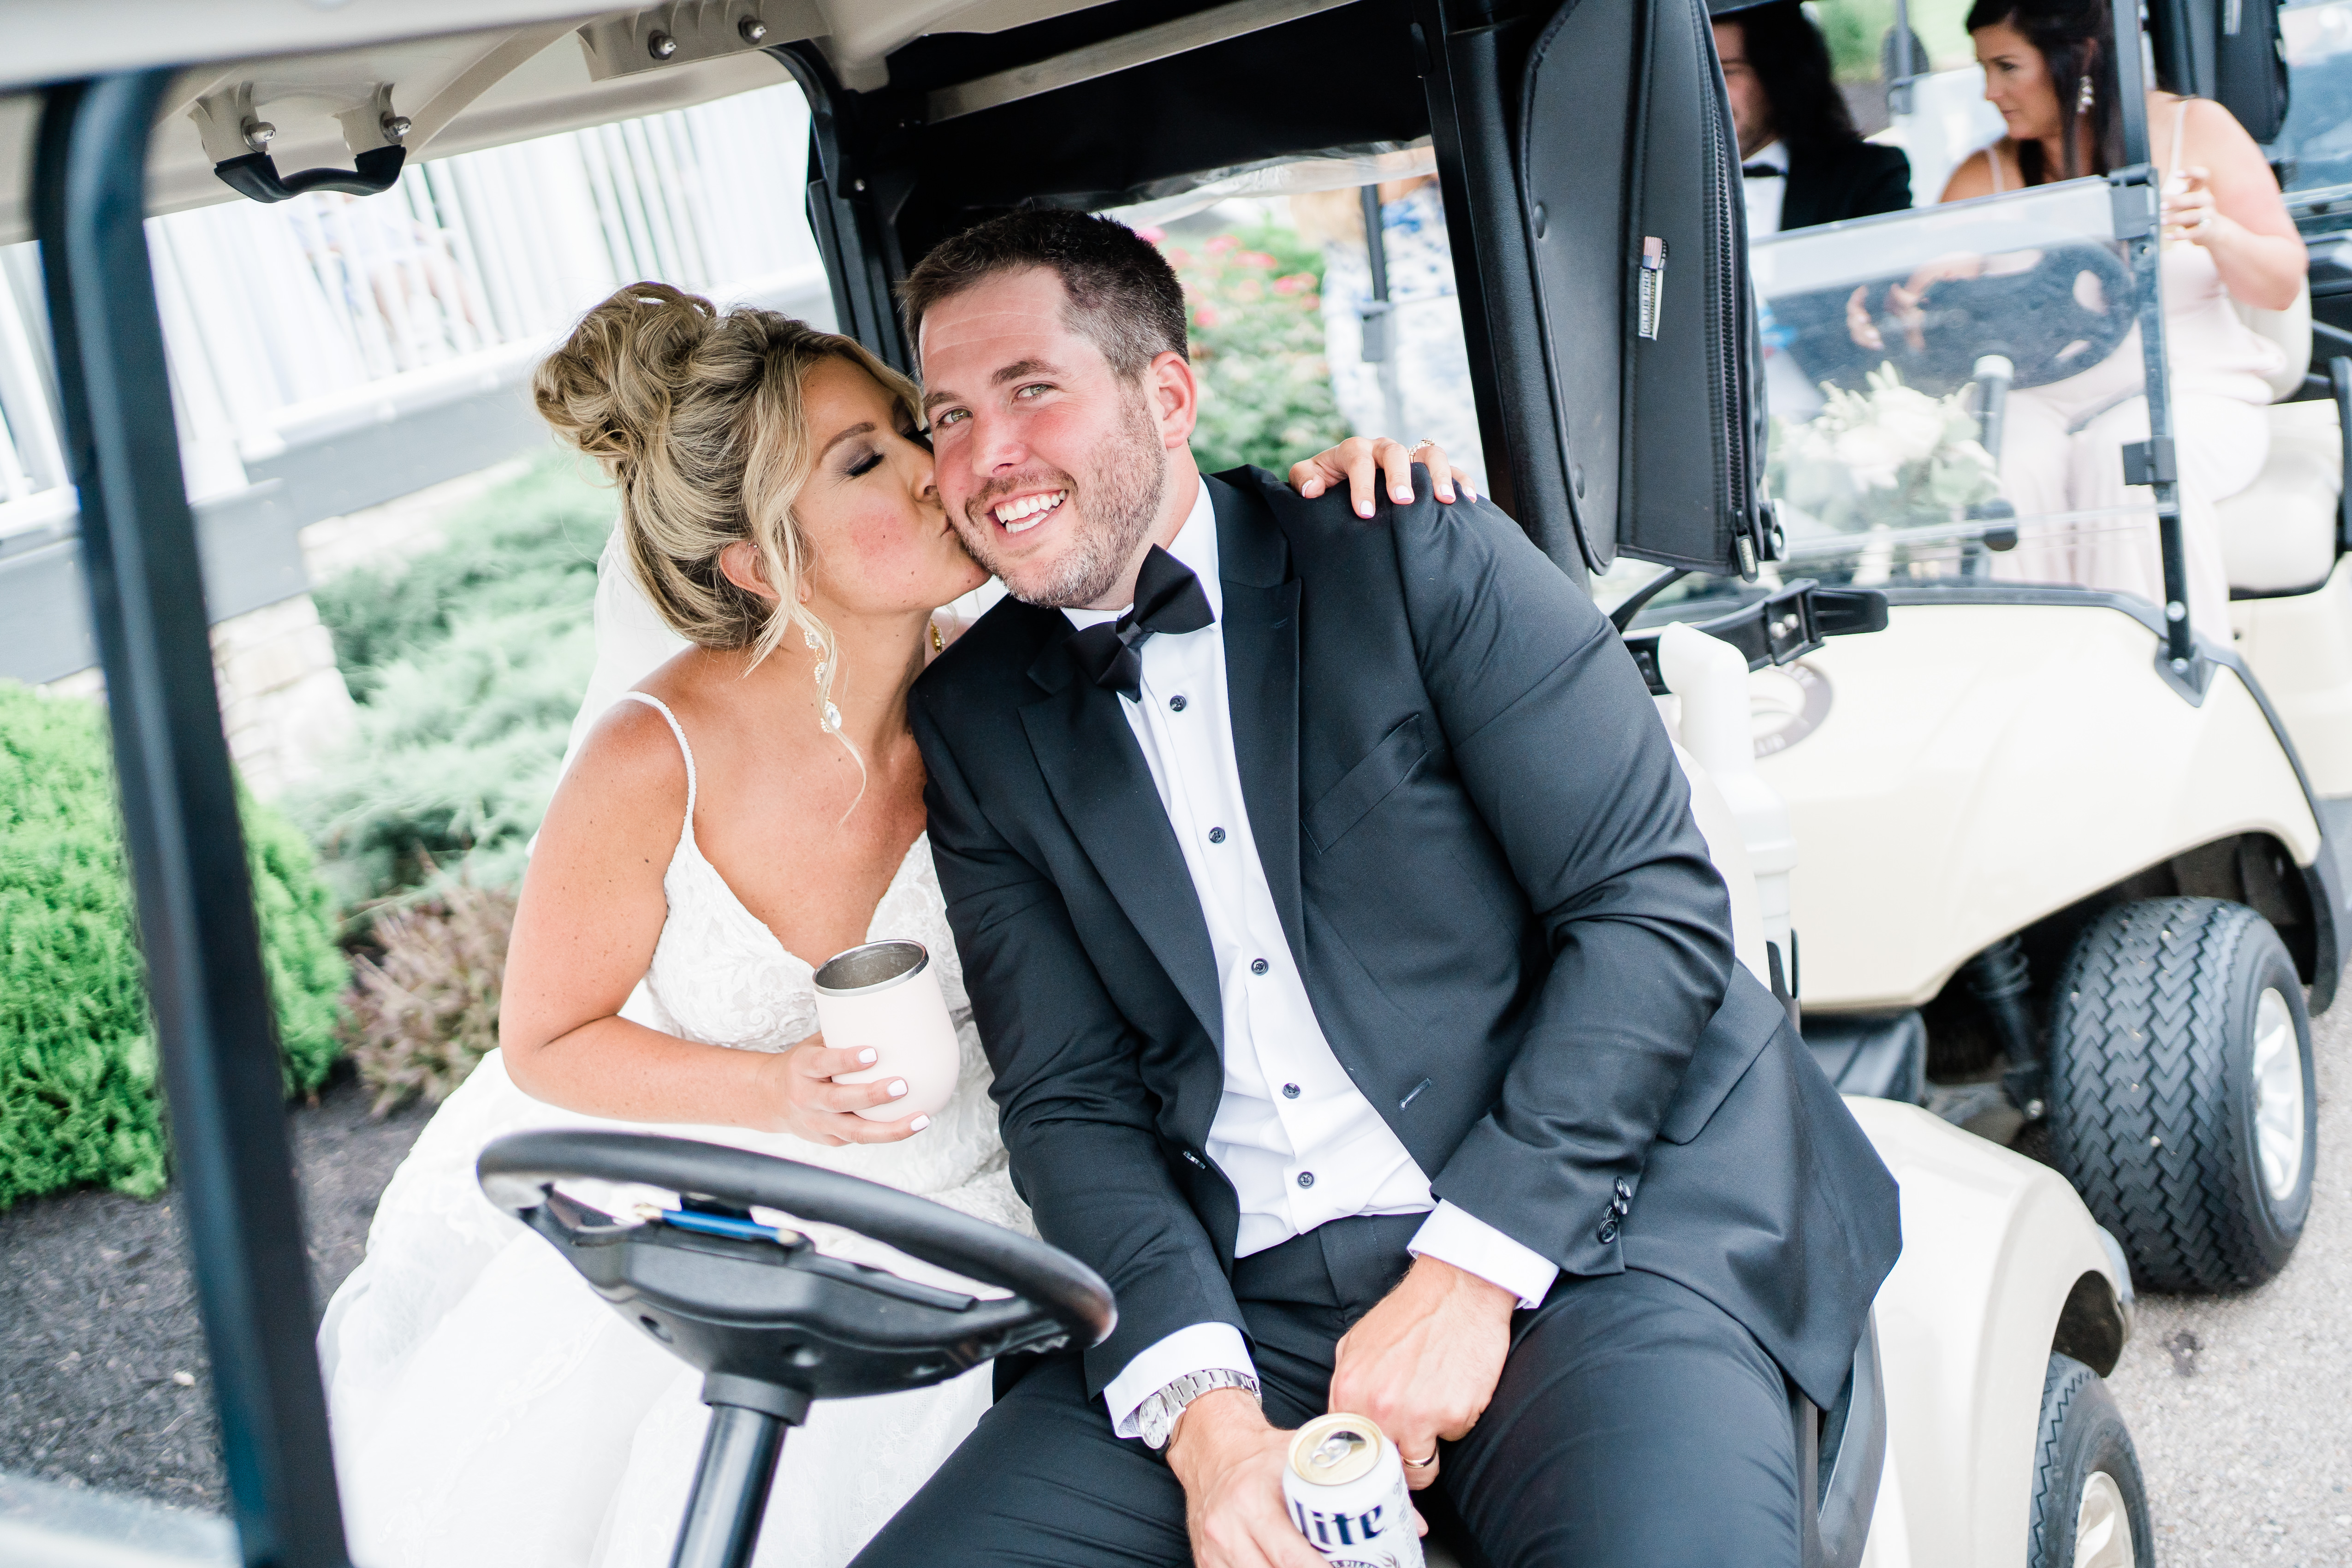 bride kissing groom on cheek while riding in golf cart